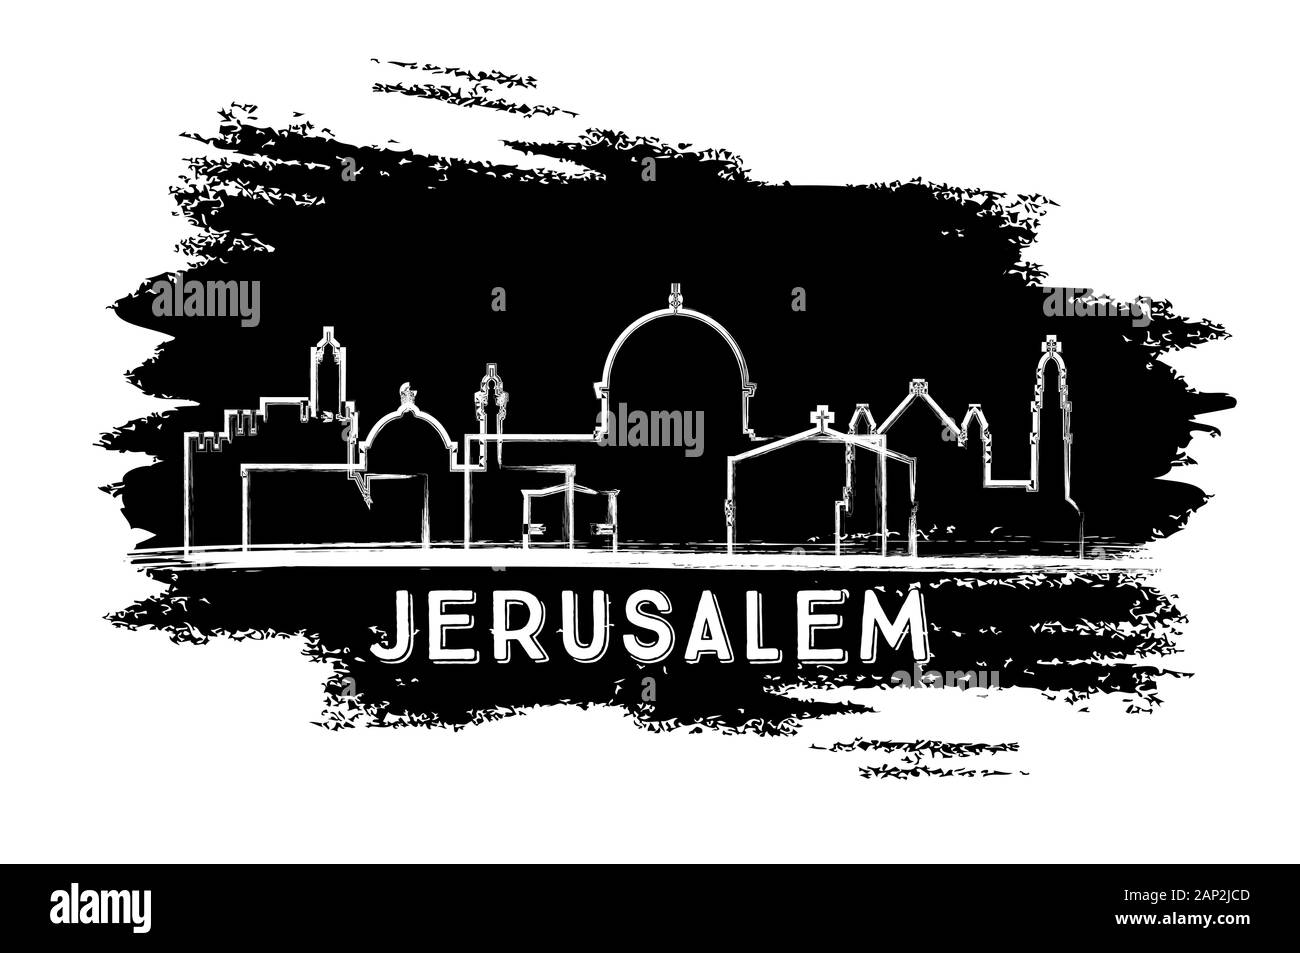 Jerusalem Israel City Skyline Silhouette. Hand Drawn Sketch. Vector Illustration. Business Travel and Tourism Concept with Historic Architecture. Stock Vector